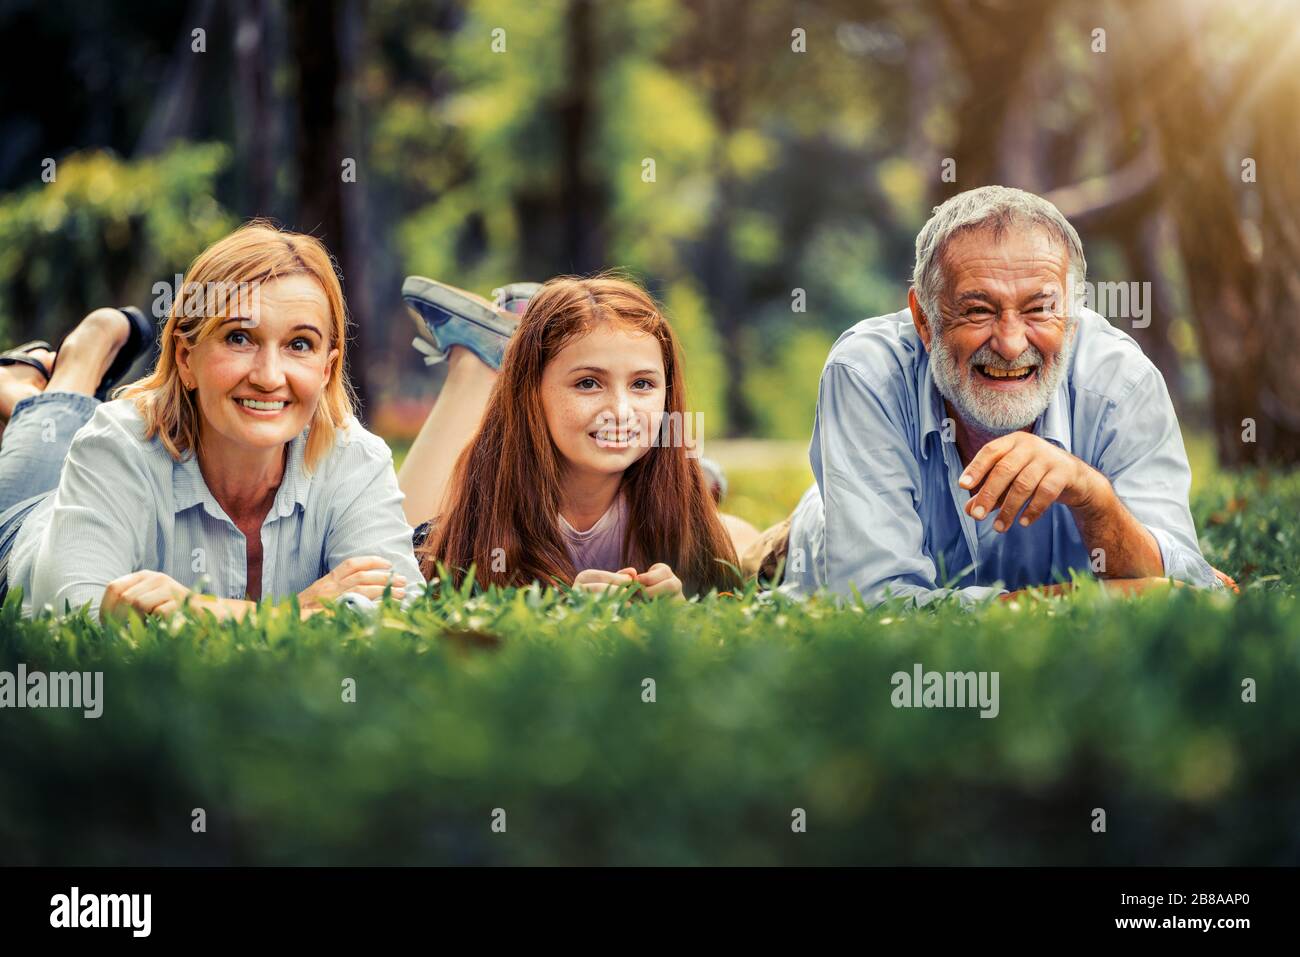 Old Man With Young Girl Stock Photos Old Man With Young Girl